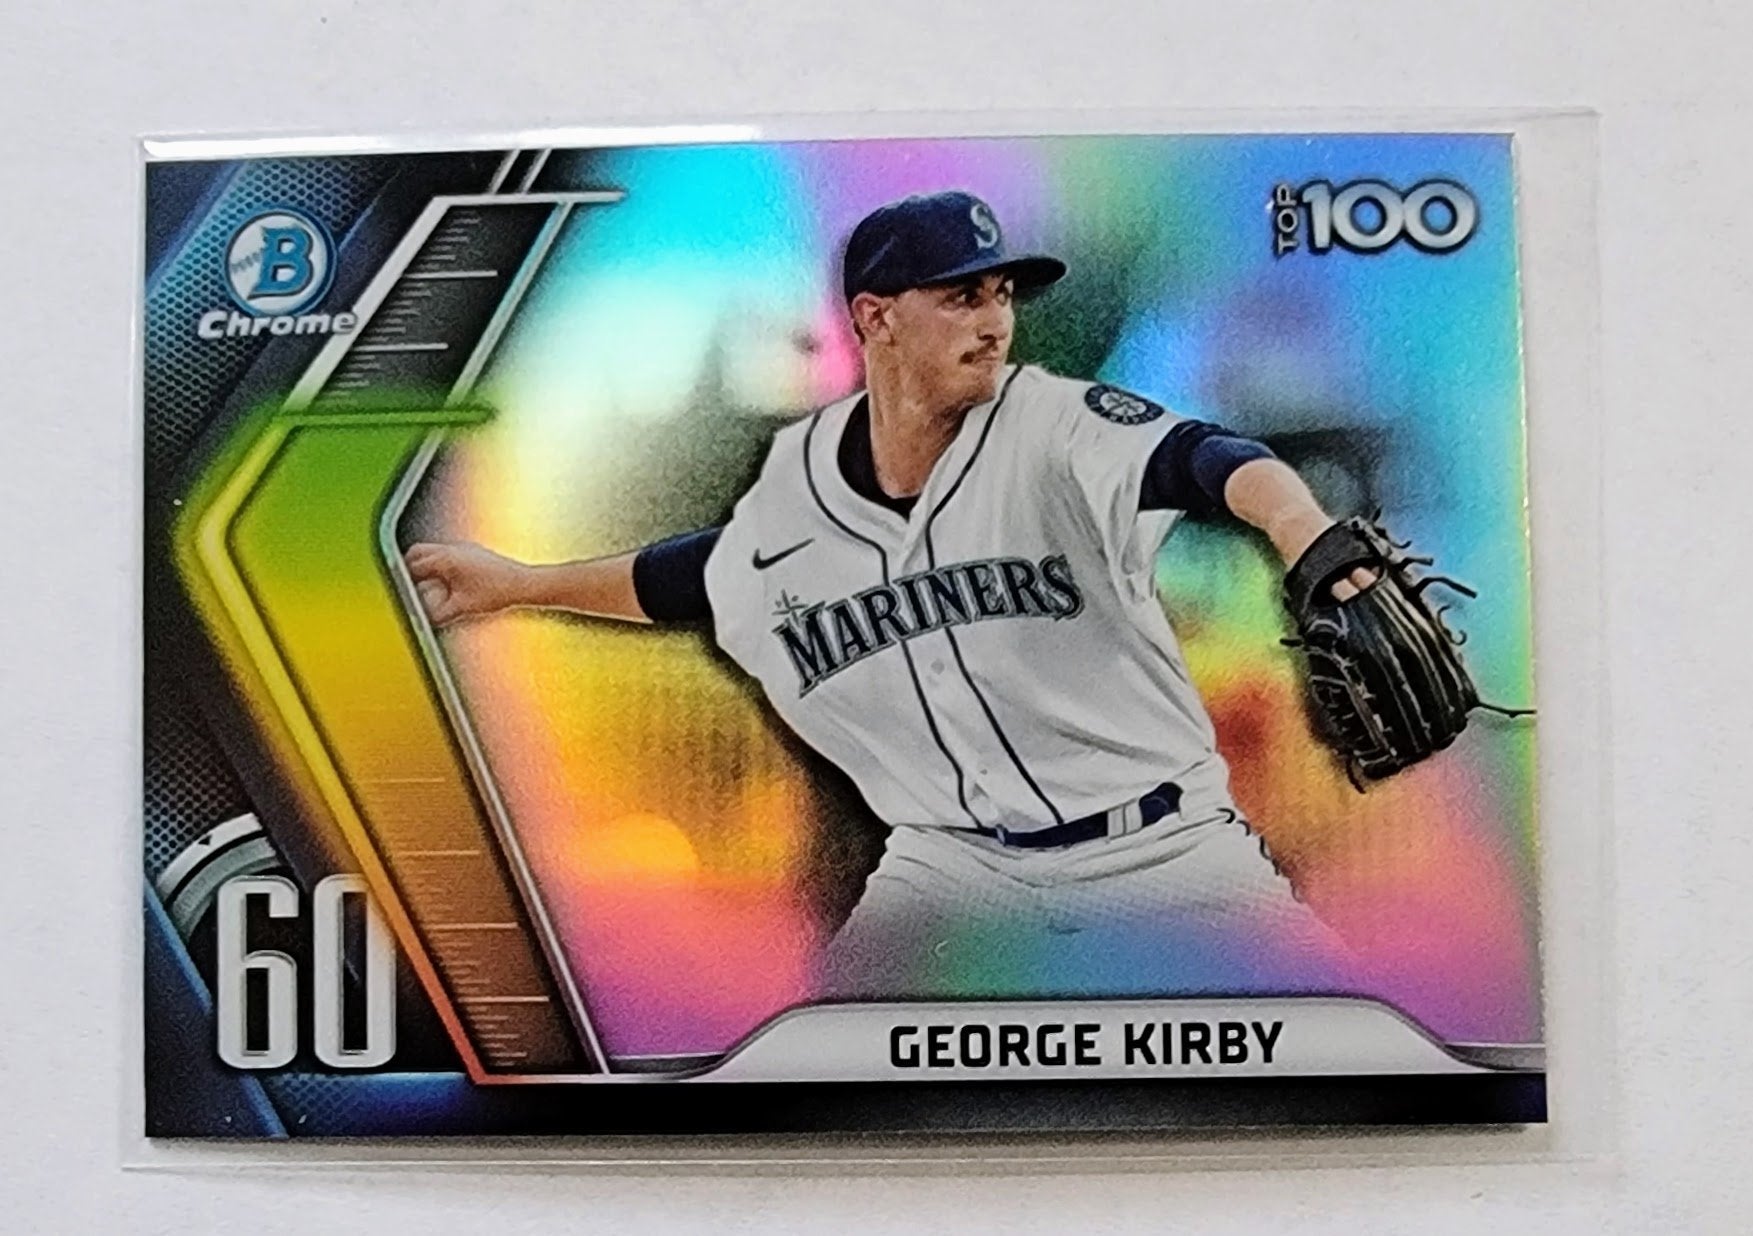 2022 Bowman Chrome George Kirby Mega Box Top 100 Refractor Baseball Card AVM1 simple Xclusive Collectibles   